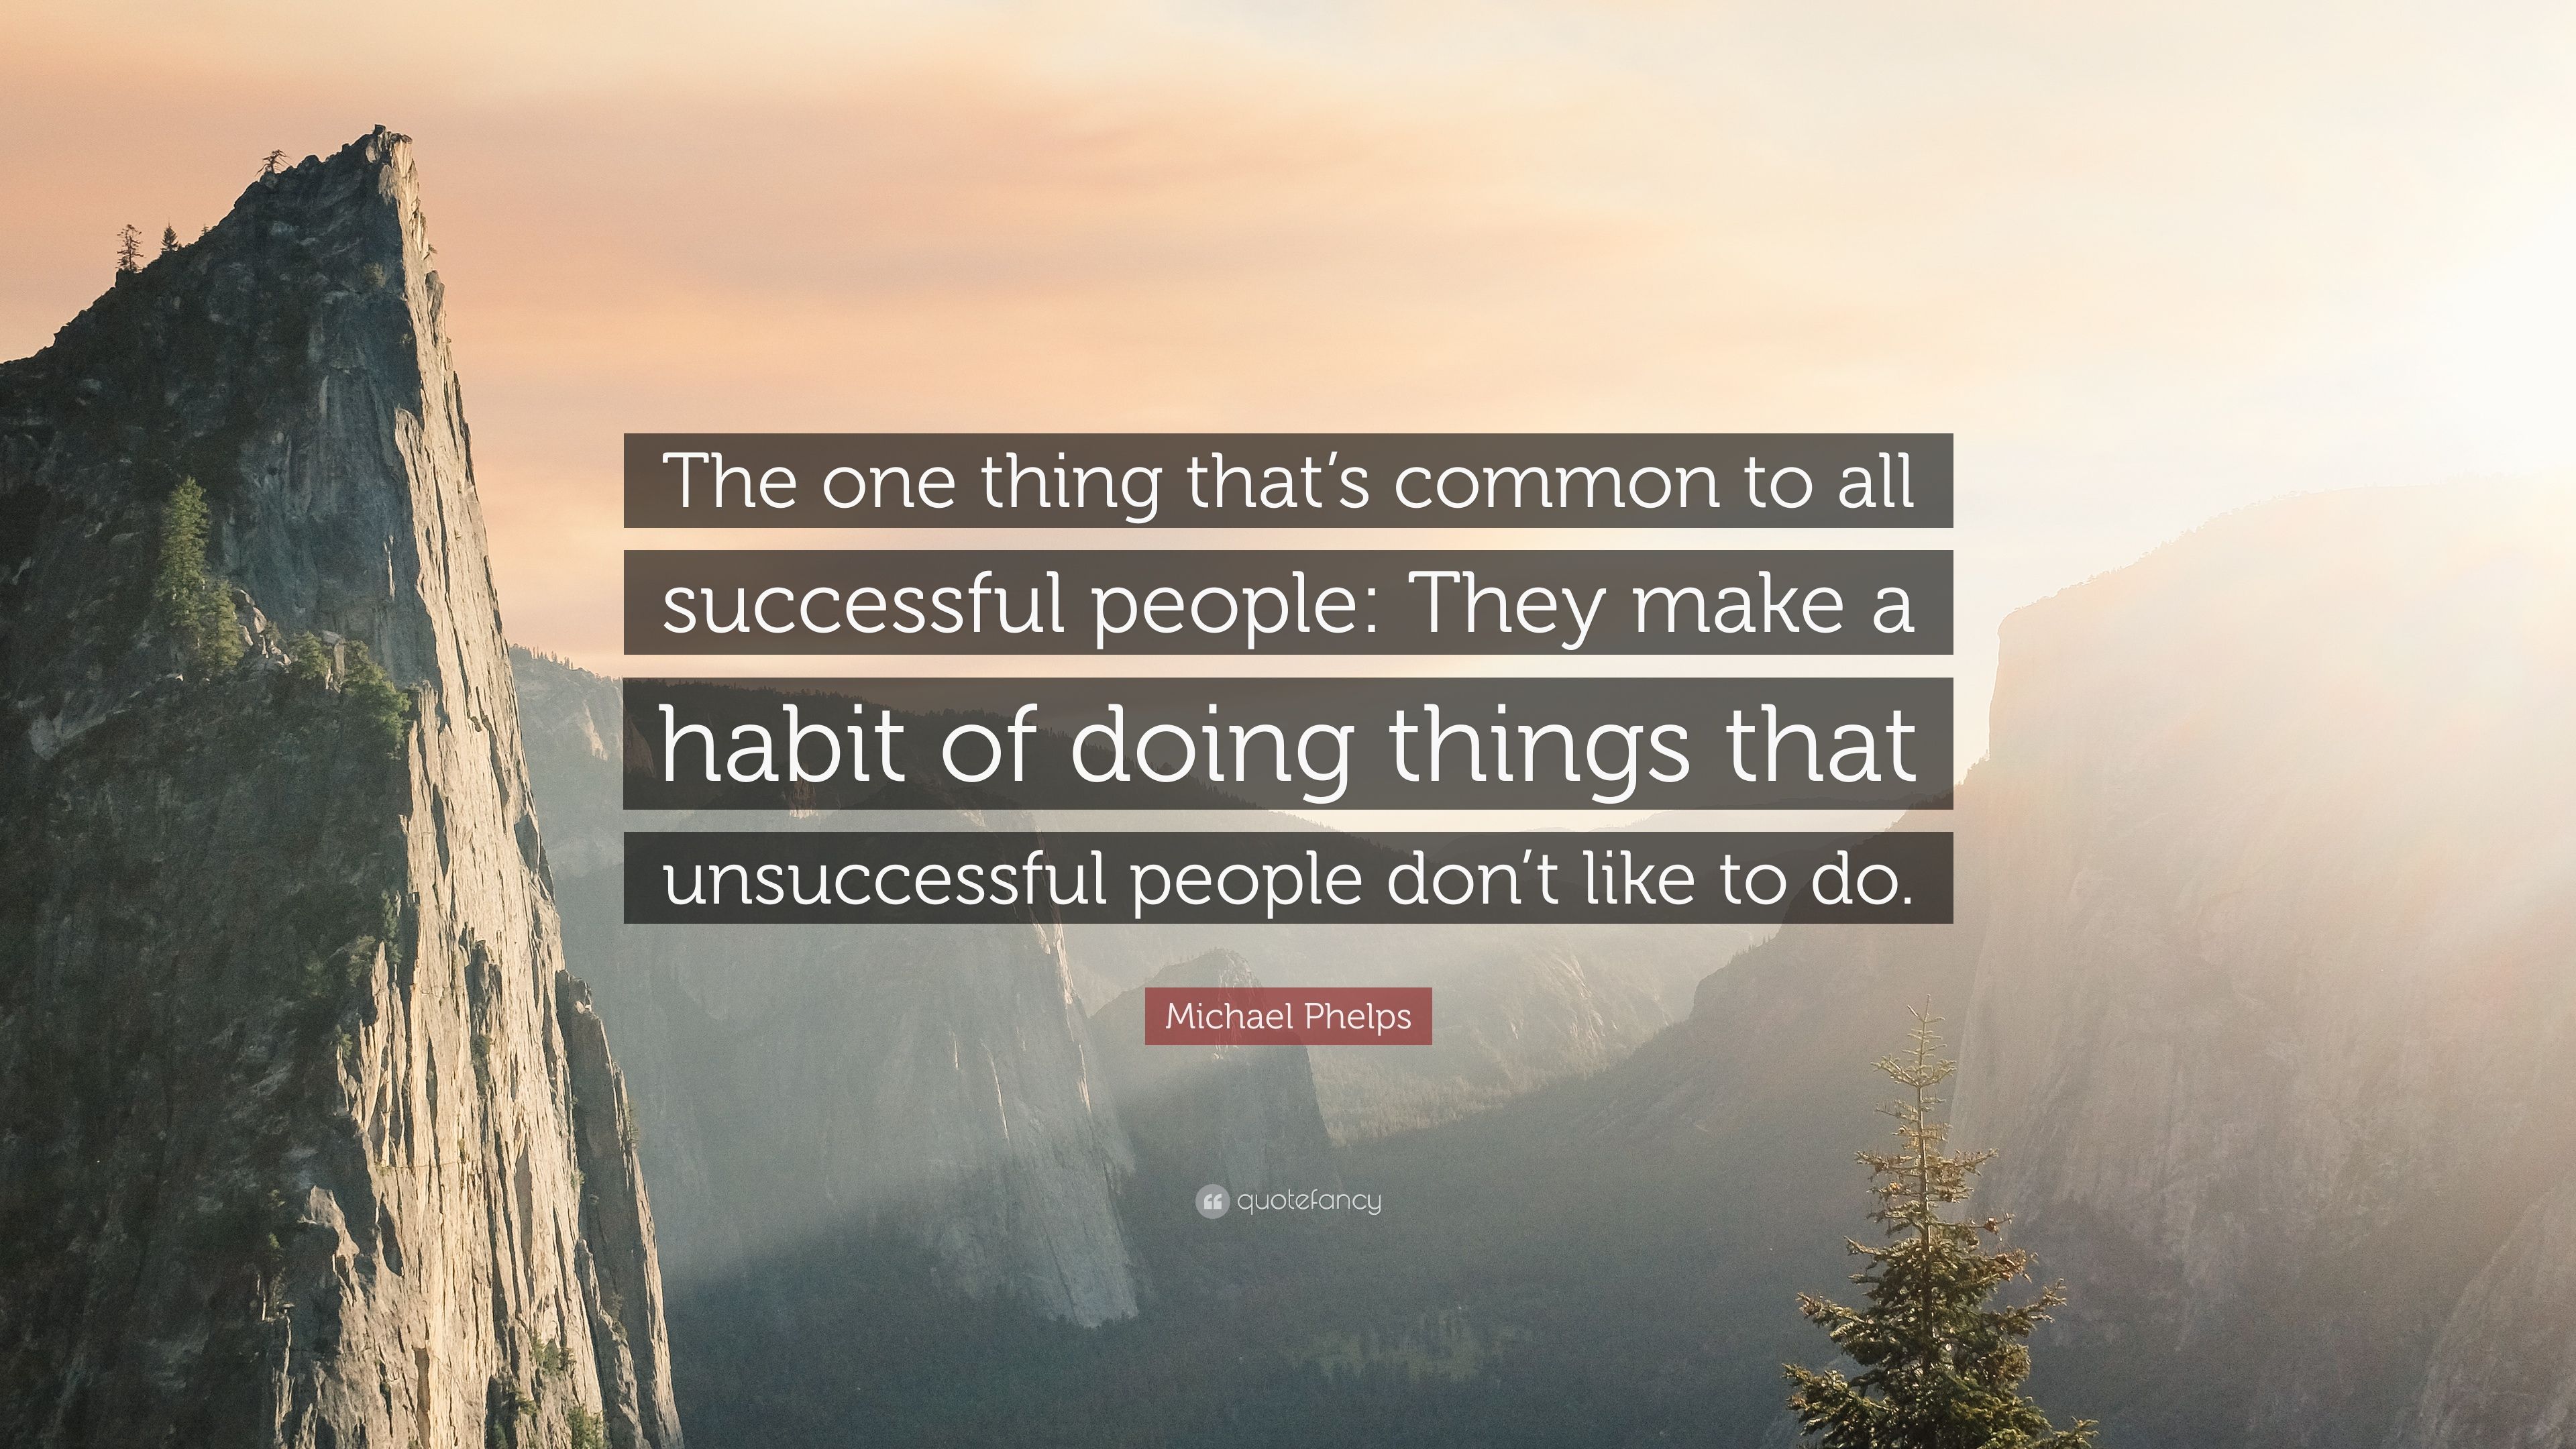 Michael Phelps Quote: “The one thing that's common to all successful people: They make a habit of doing things that unsuccessful people don't l.” (12 wallpaper)